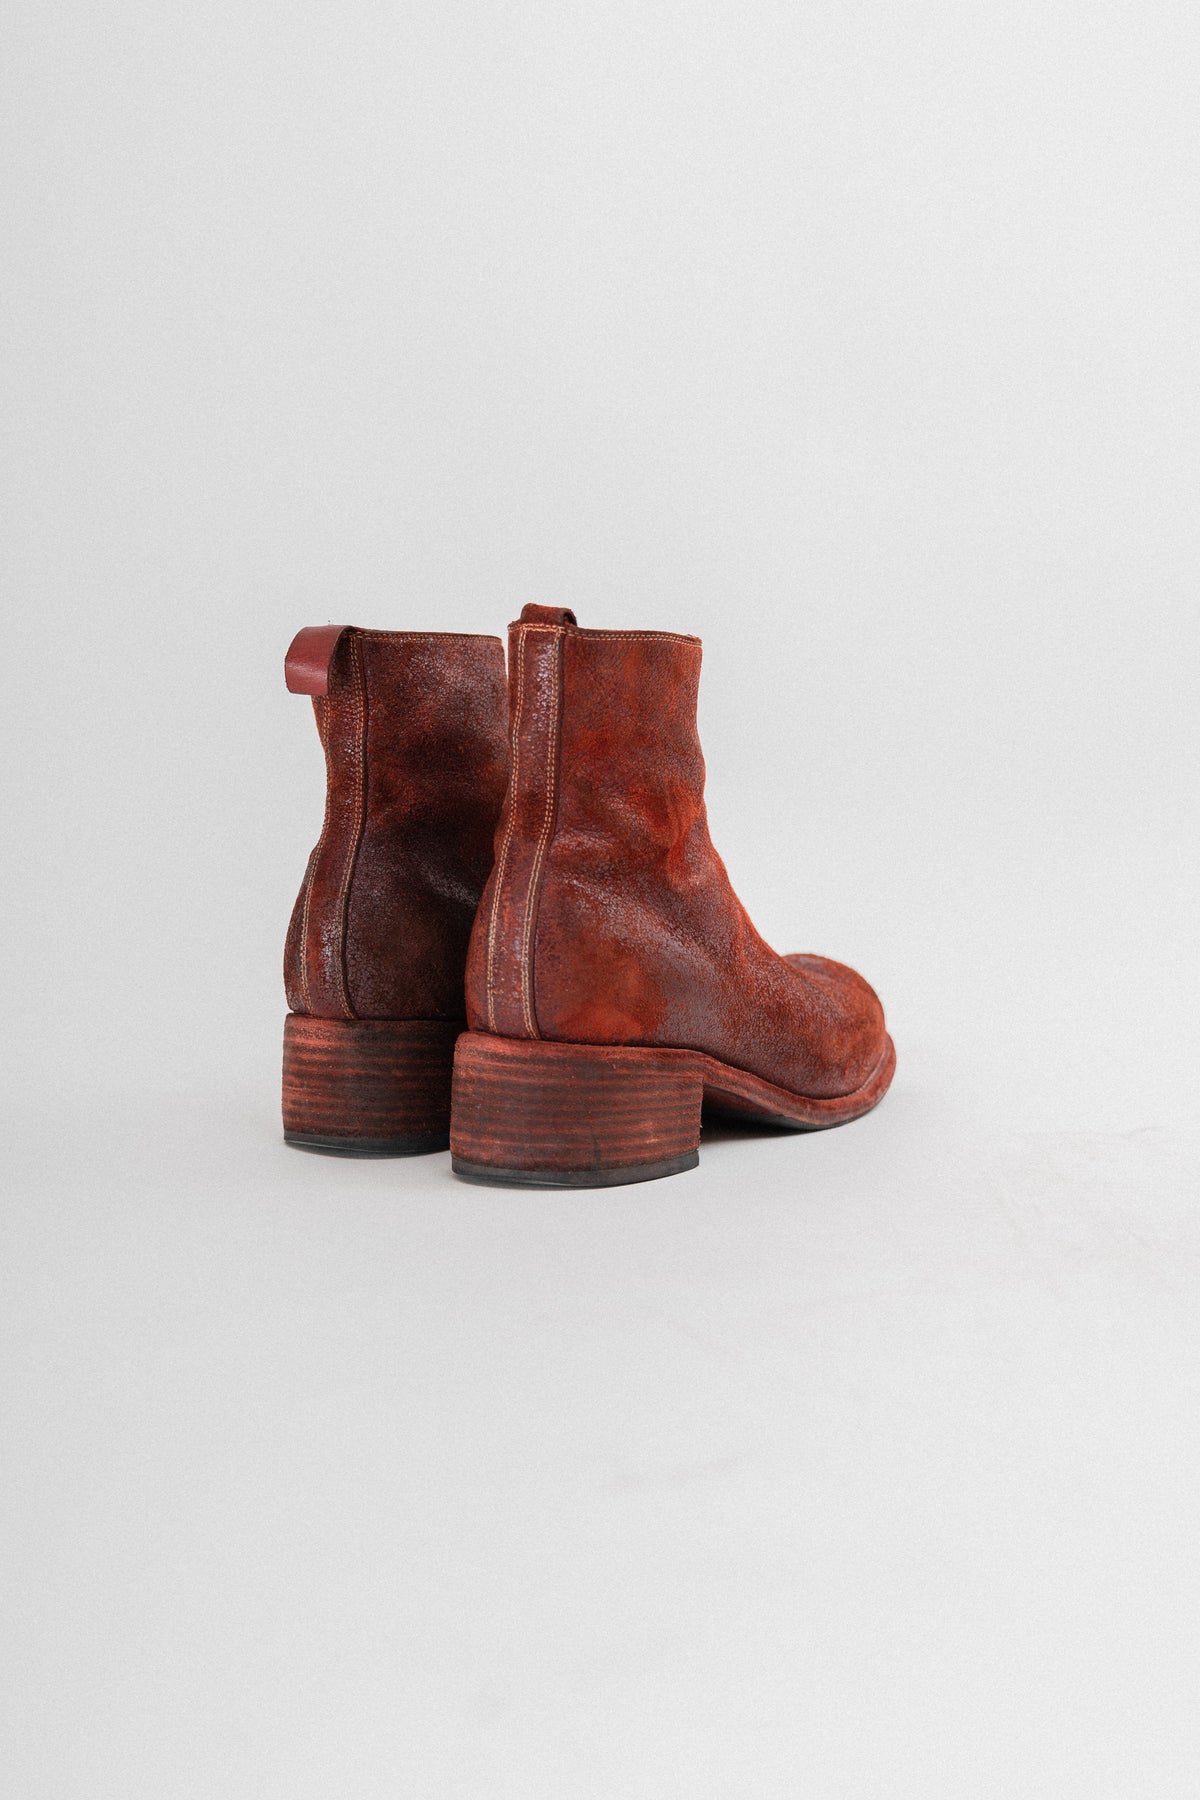 GUIDI - PL1 Horse leather front zip boots – L'OBSCUR